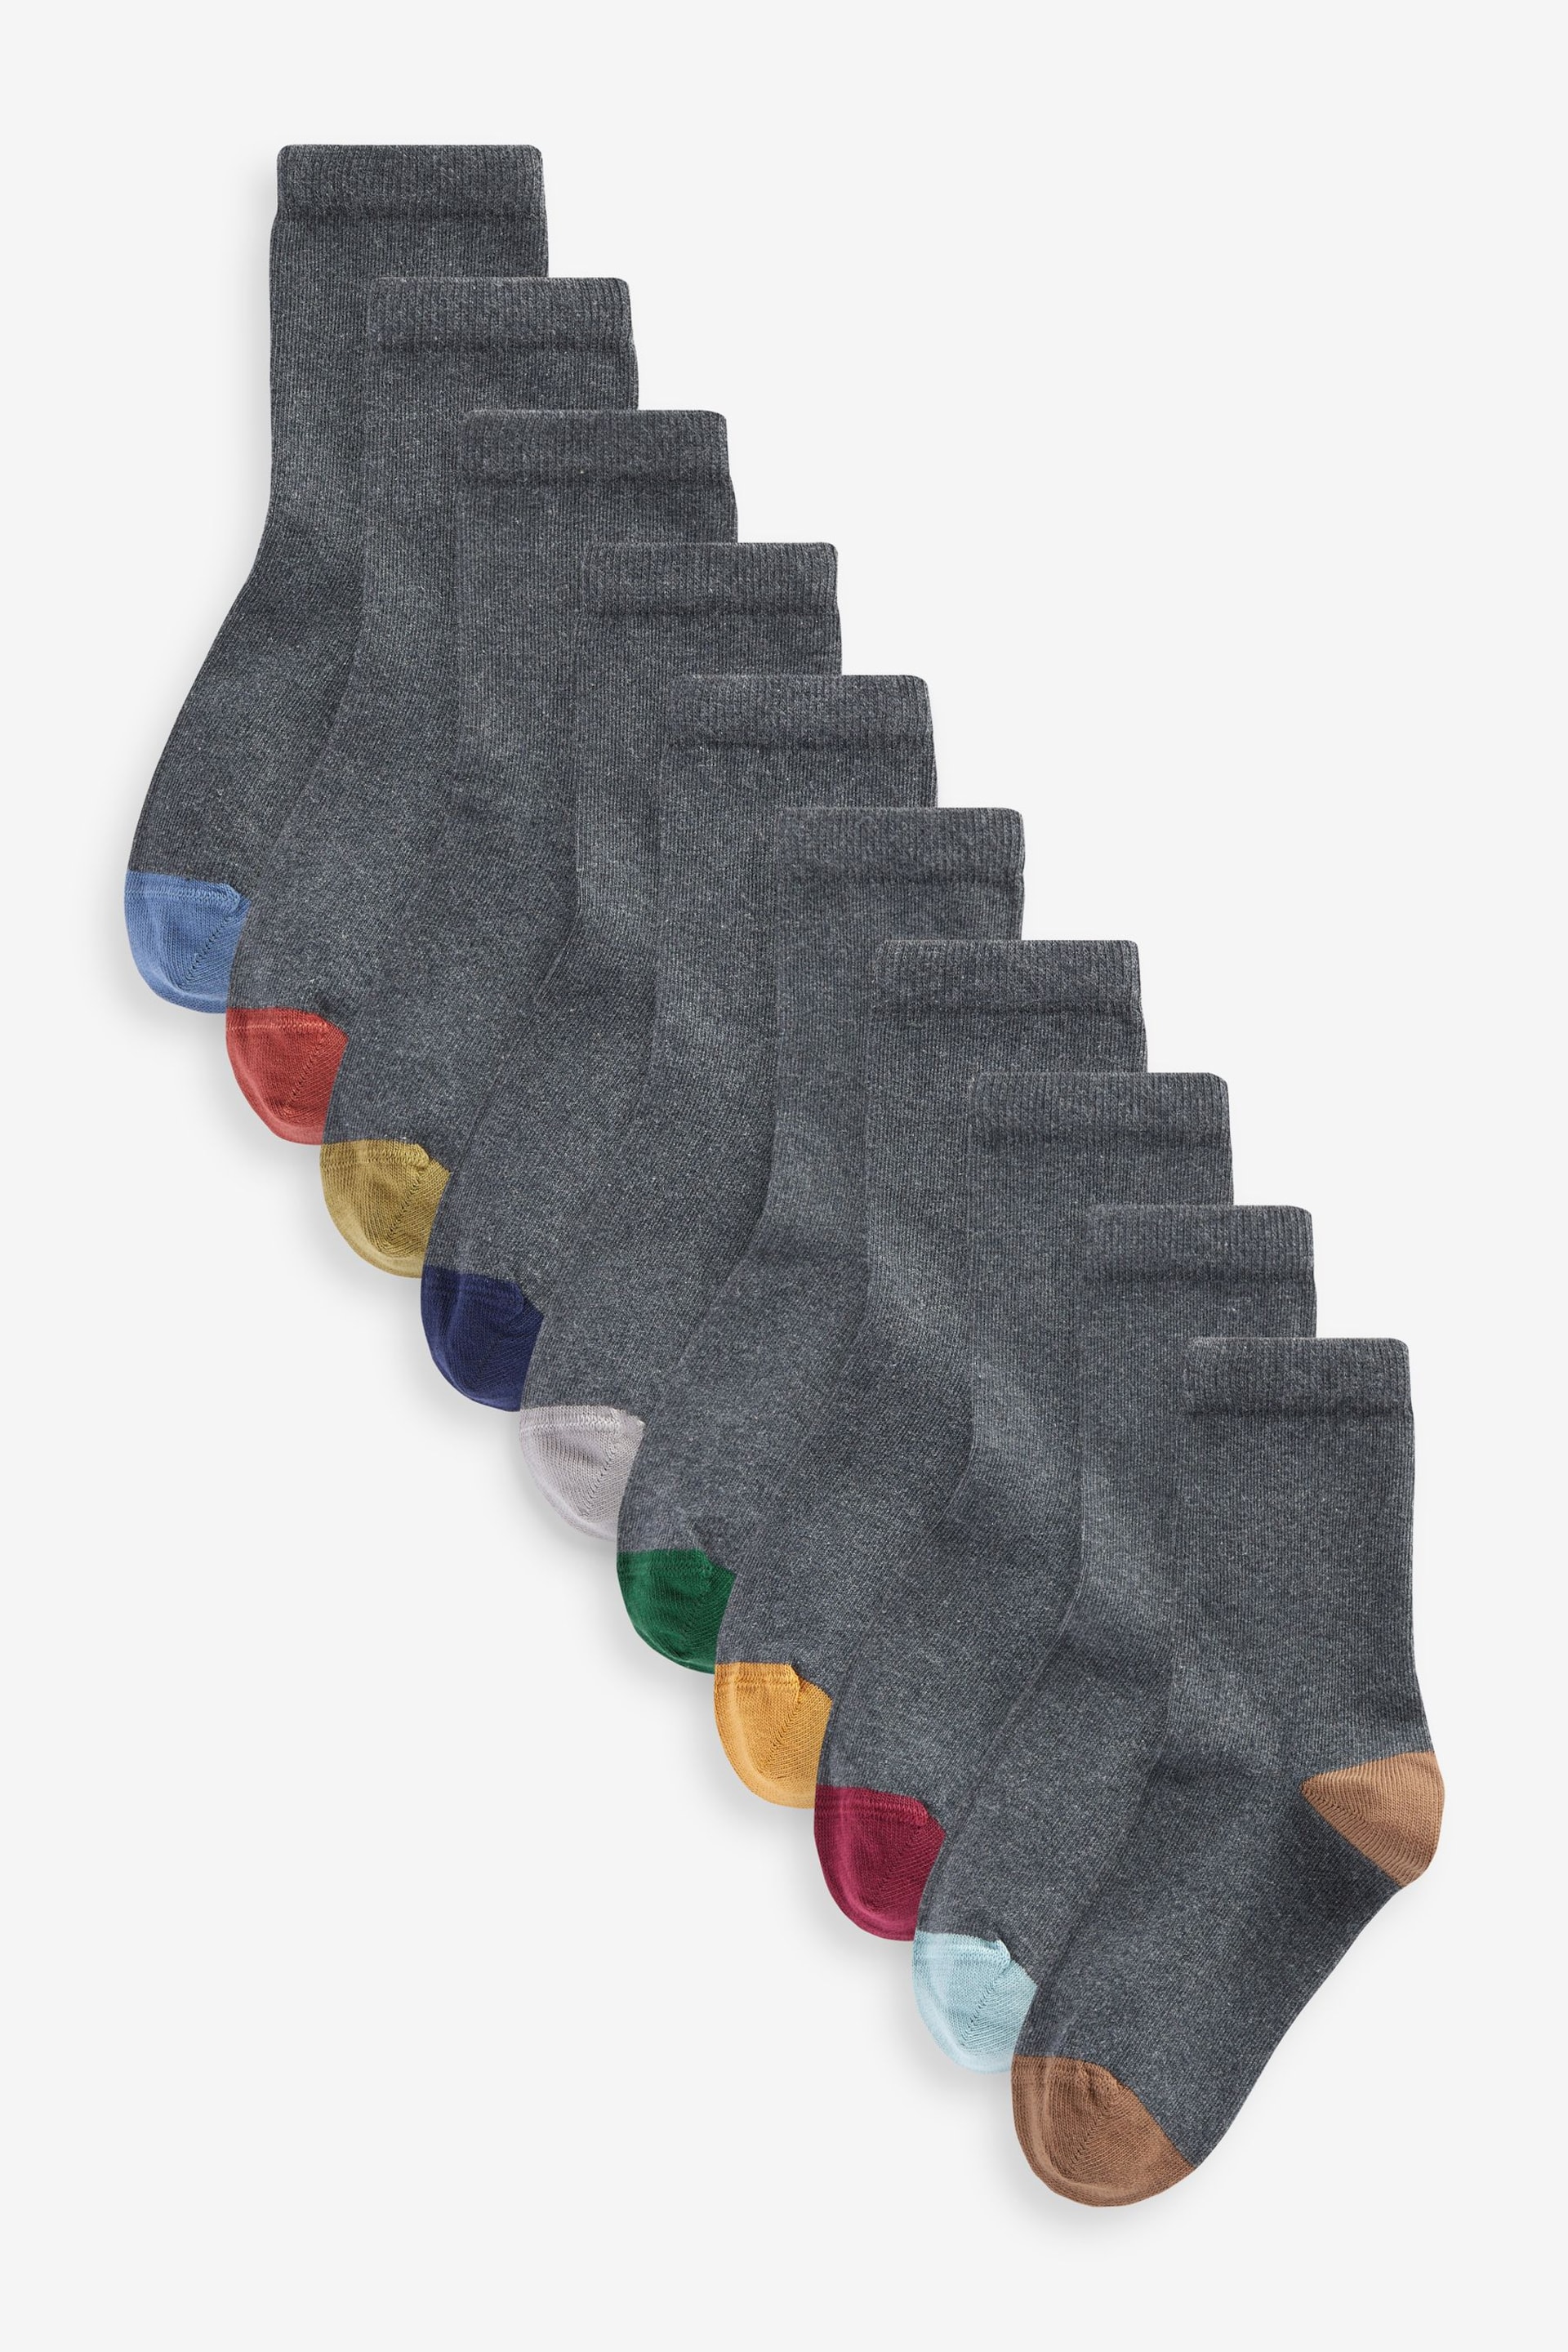 Grey with Contrast Heel and Toe Cotton Rich Socks 10 Pack - Image 1 of 11